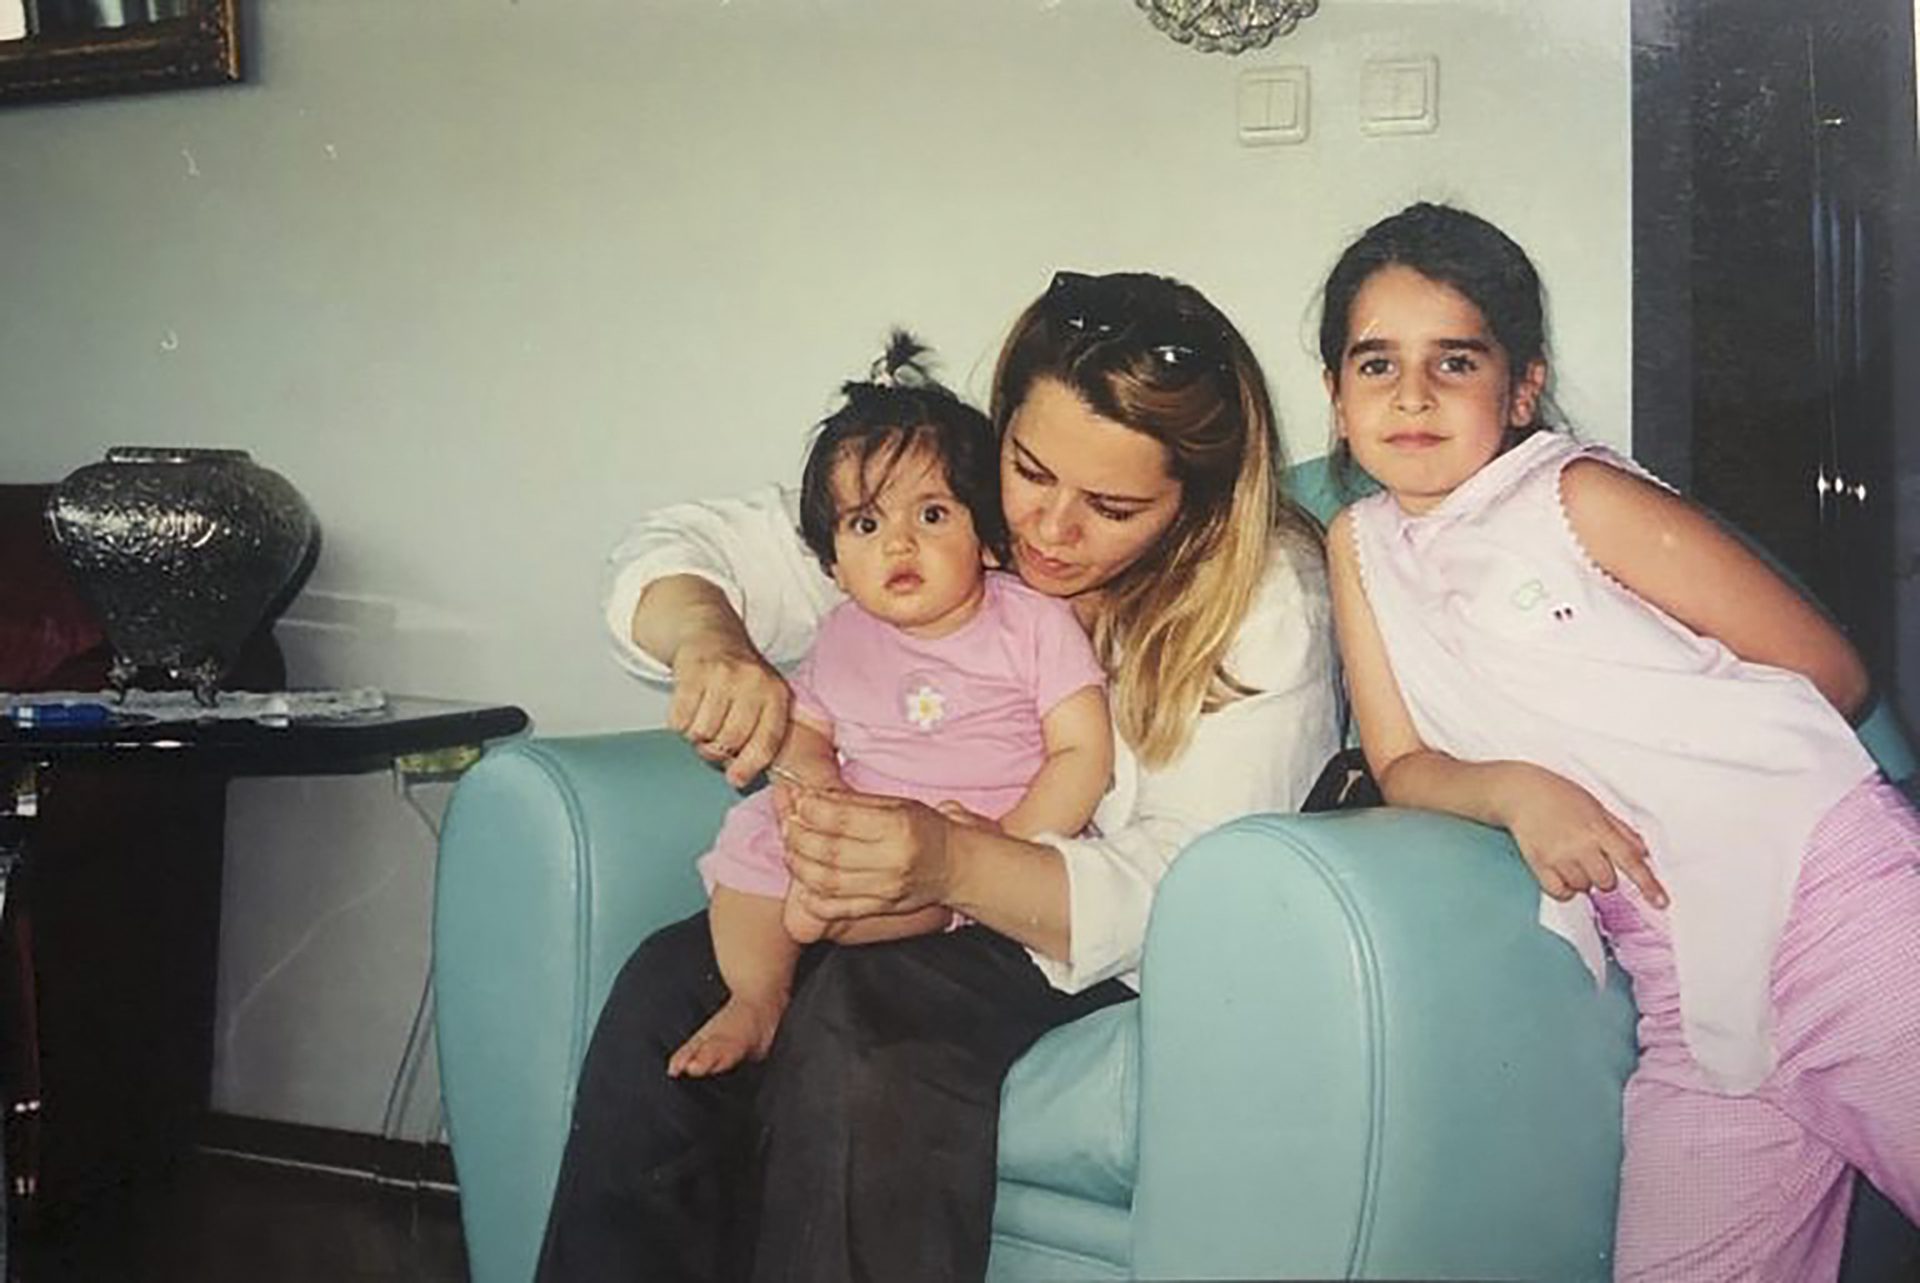 Piril as a child with her mother and cousin by a blue chair while her mother clips her baby cousin's toenails